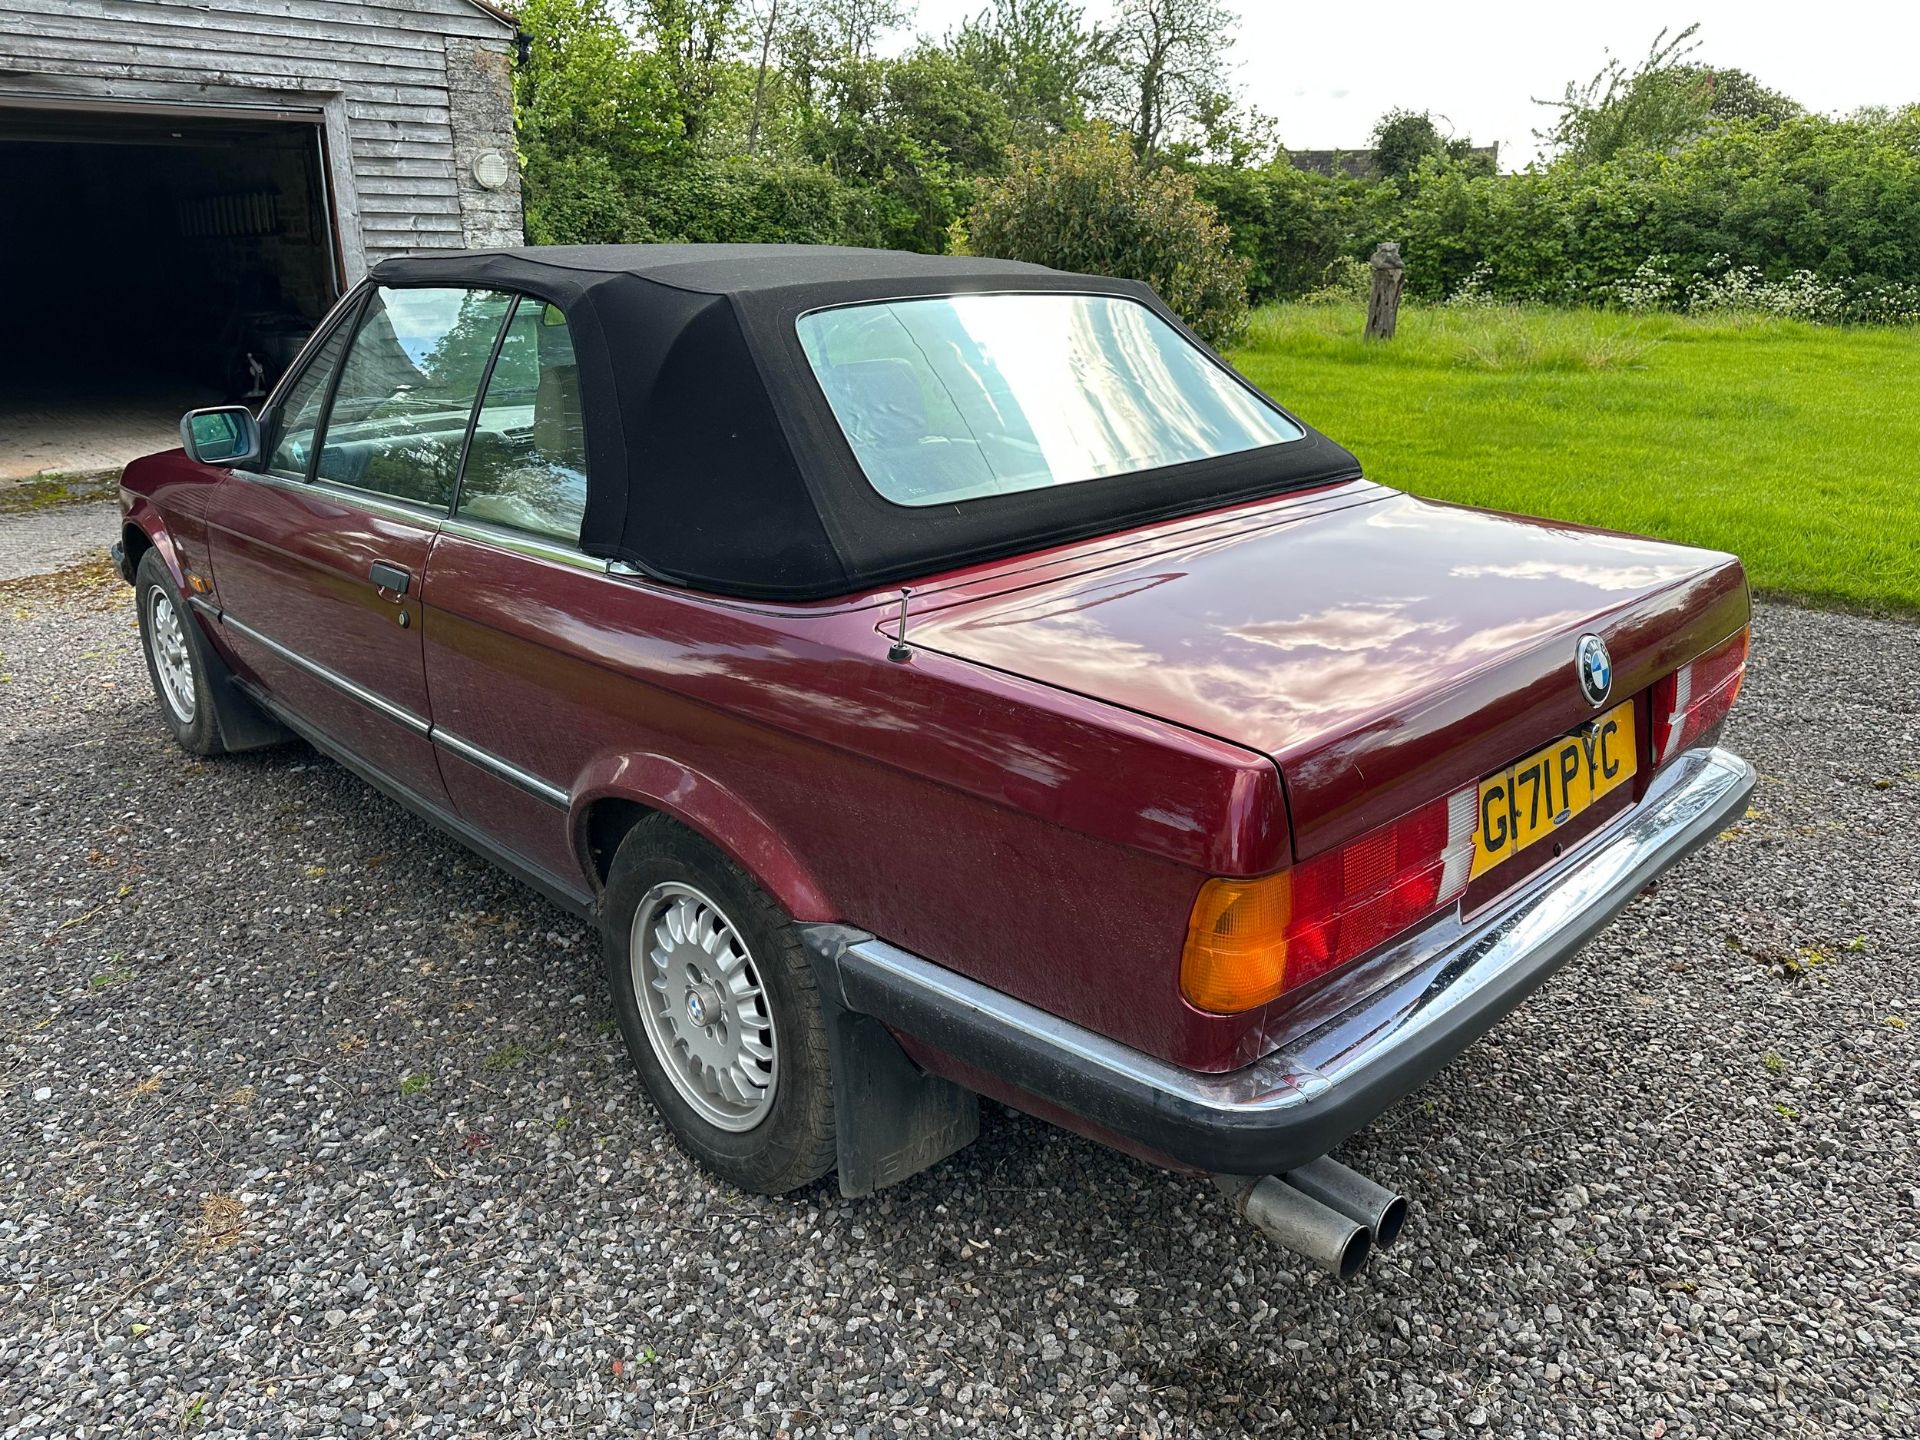 1990 BMW 325i Convertible Registration number G171 PYC Chassis number WBABB12070LB95832 Engine - Image 11 of 67